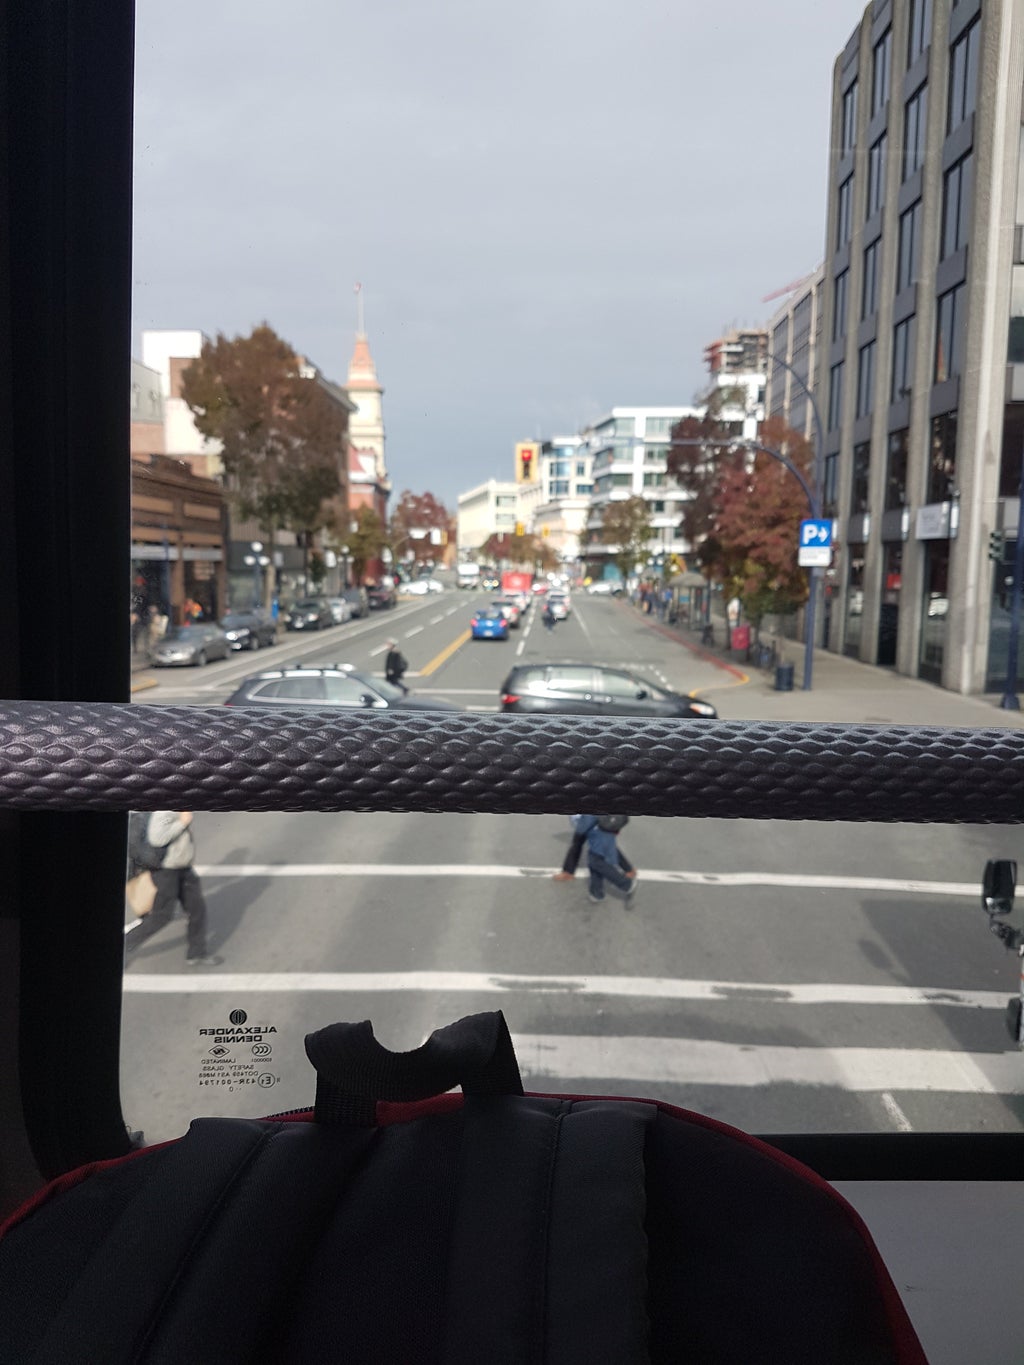 Front row on a double decker bus = one of the best ways to view the city!